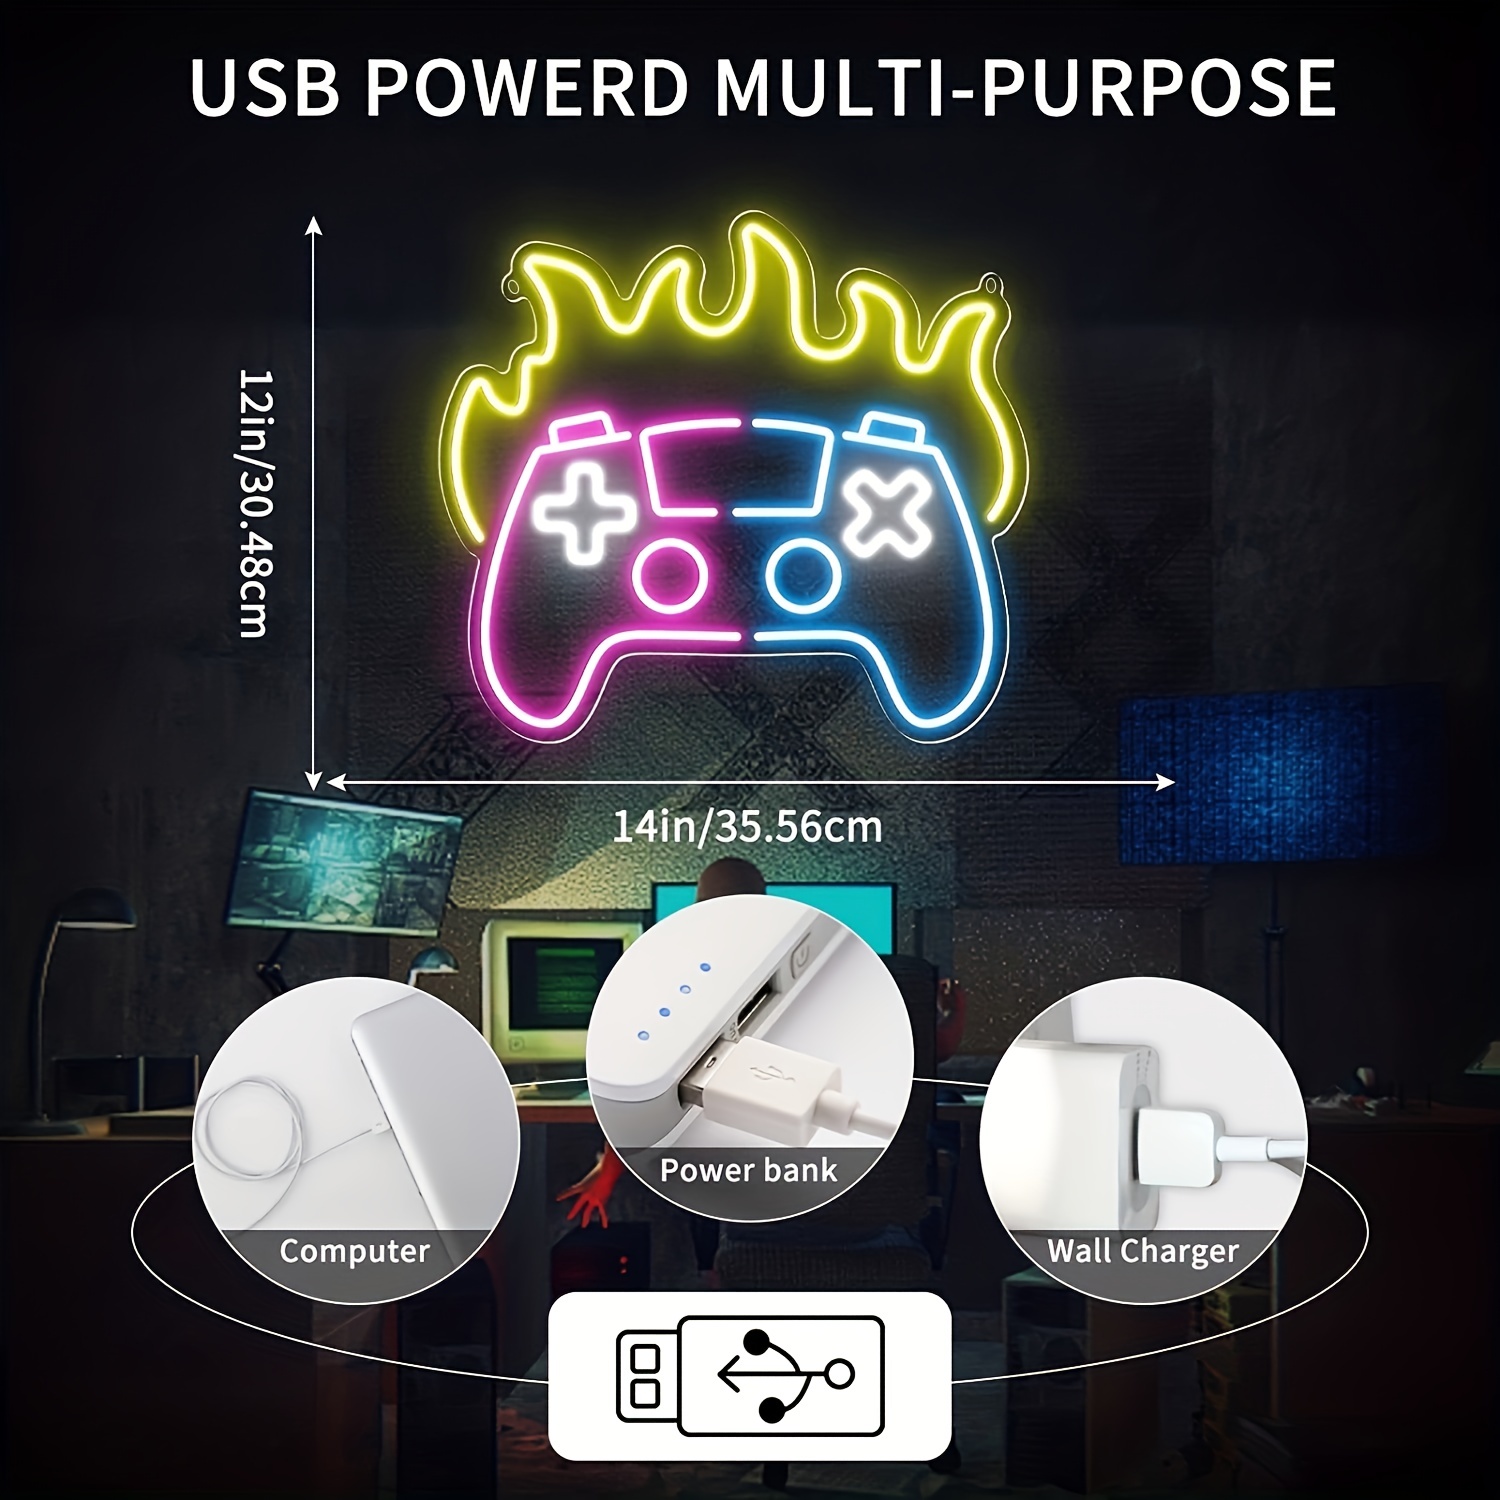 Gamer Neon Sign Gaming Neon Lights Gamepad Controller LED Signs for Game  Room Decor Light Up Signs for Bedroom Teens Boys Room Neon Wall Signs Decor